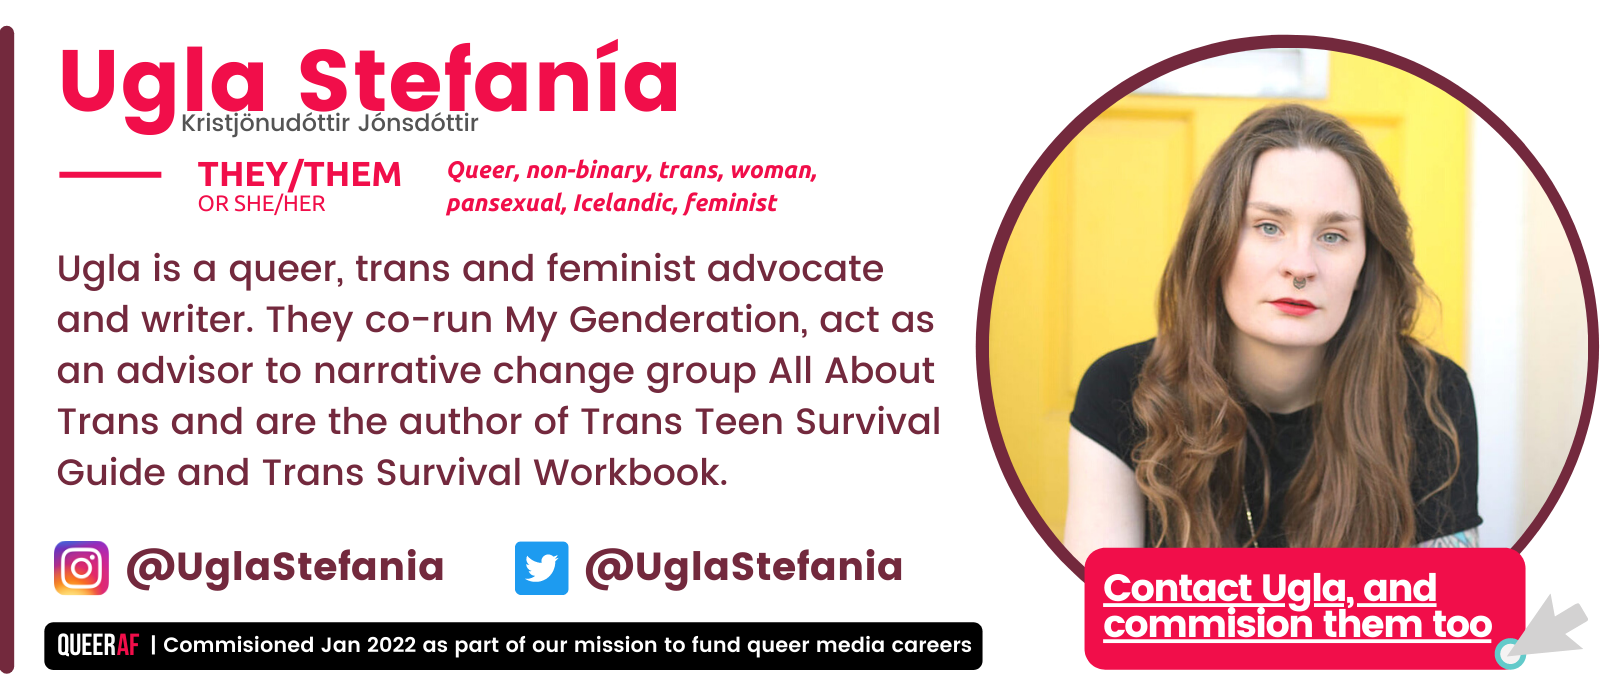 They/them Queer, non-binary, trans, woman, pansexual, Icelandic, feminist  Ugla Stefanía Or SHE/HER Kristjönudóttir Jónsdóttir Ugla is a queer, trans and feminist advocate and writer. They co-run My Genderation, act as an advisor to narrative change group All About Trans and are the author of Trans Teen Survival Guide and Trans Survival Workbook.